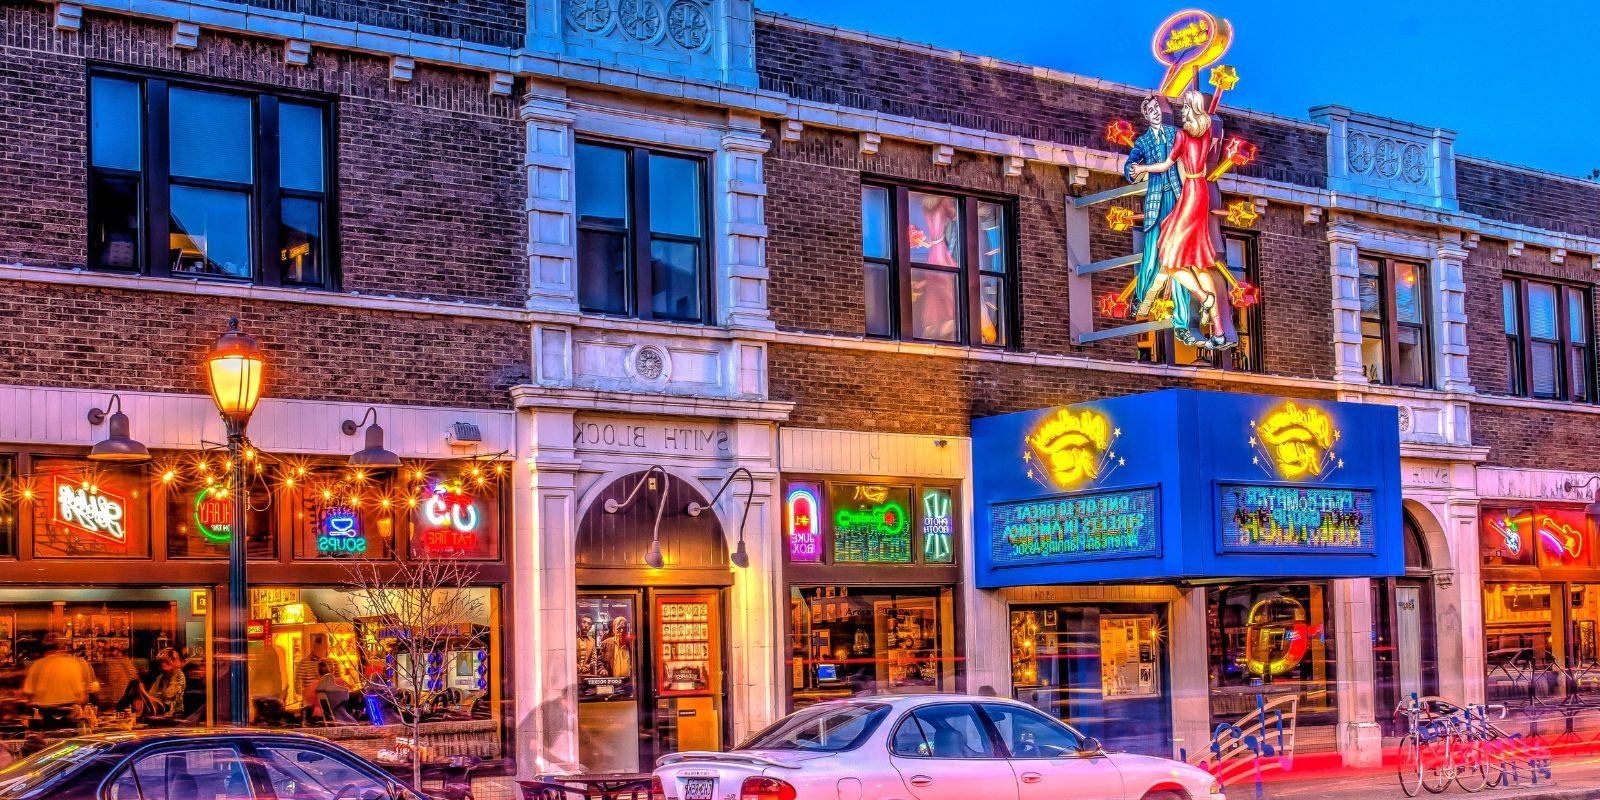 As the sun sets, neon signs light up the Delmar Loop and its businesses, including Blueberry Hill.